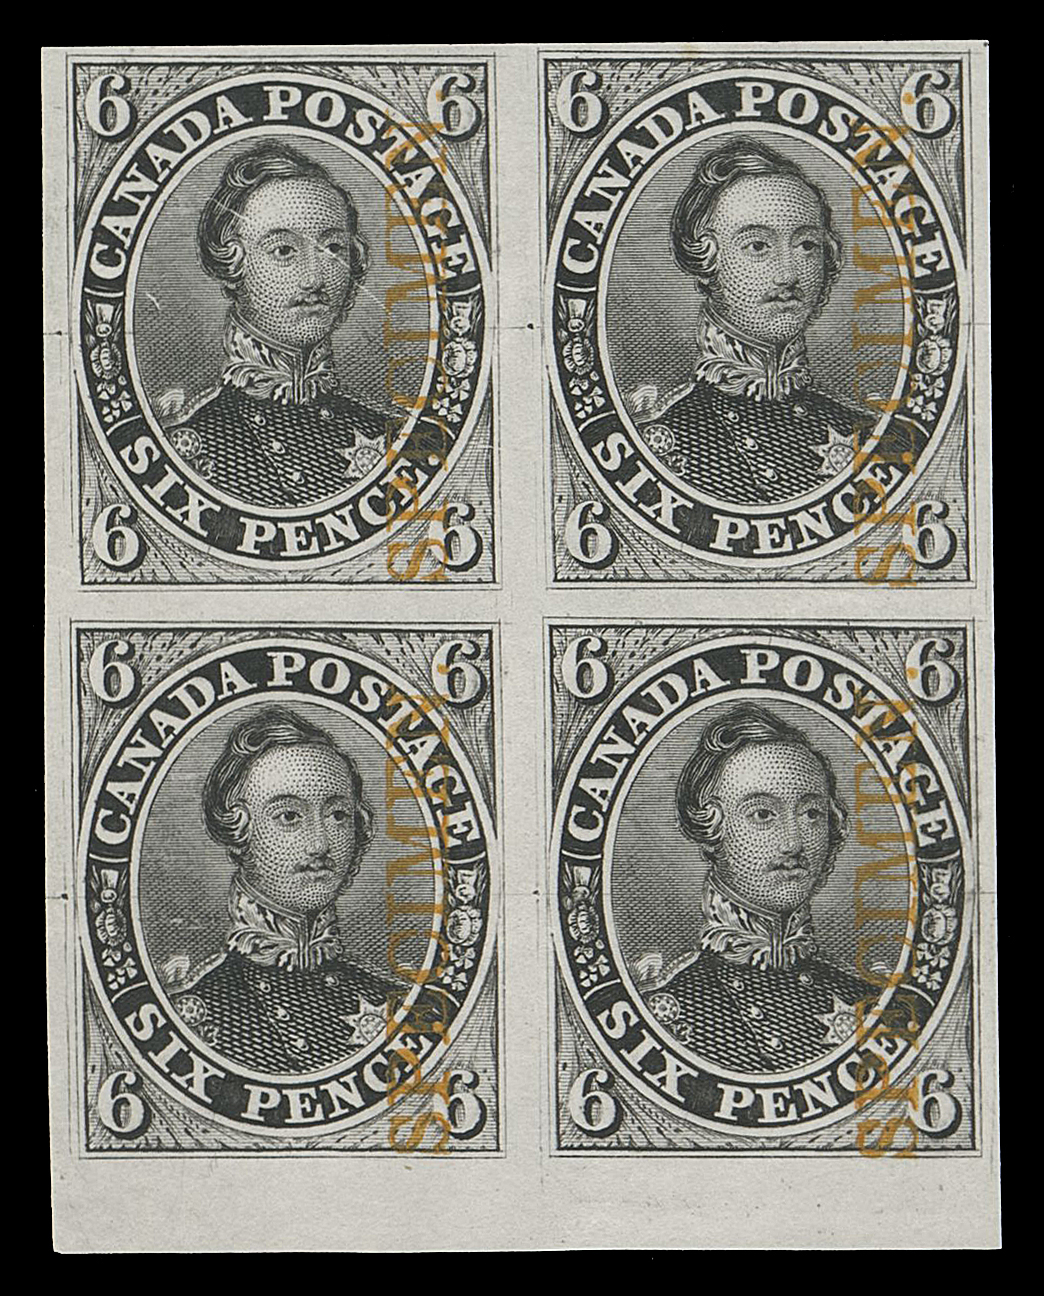 SIX PENCE AND TEN CENTS  2TCx,A trial colour plate proof block printed in black on india paper, vertical SPECIMEN overprint in orange, VF

Provenance: Henry Gates (Part 1), Maresch Sale 124, March 1981; Lot 251
The "Lindemann" Collection (private treaty, circa. 1997)